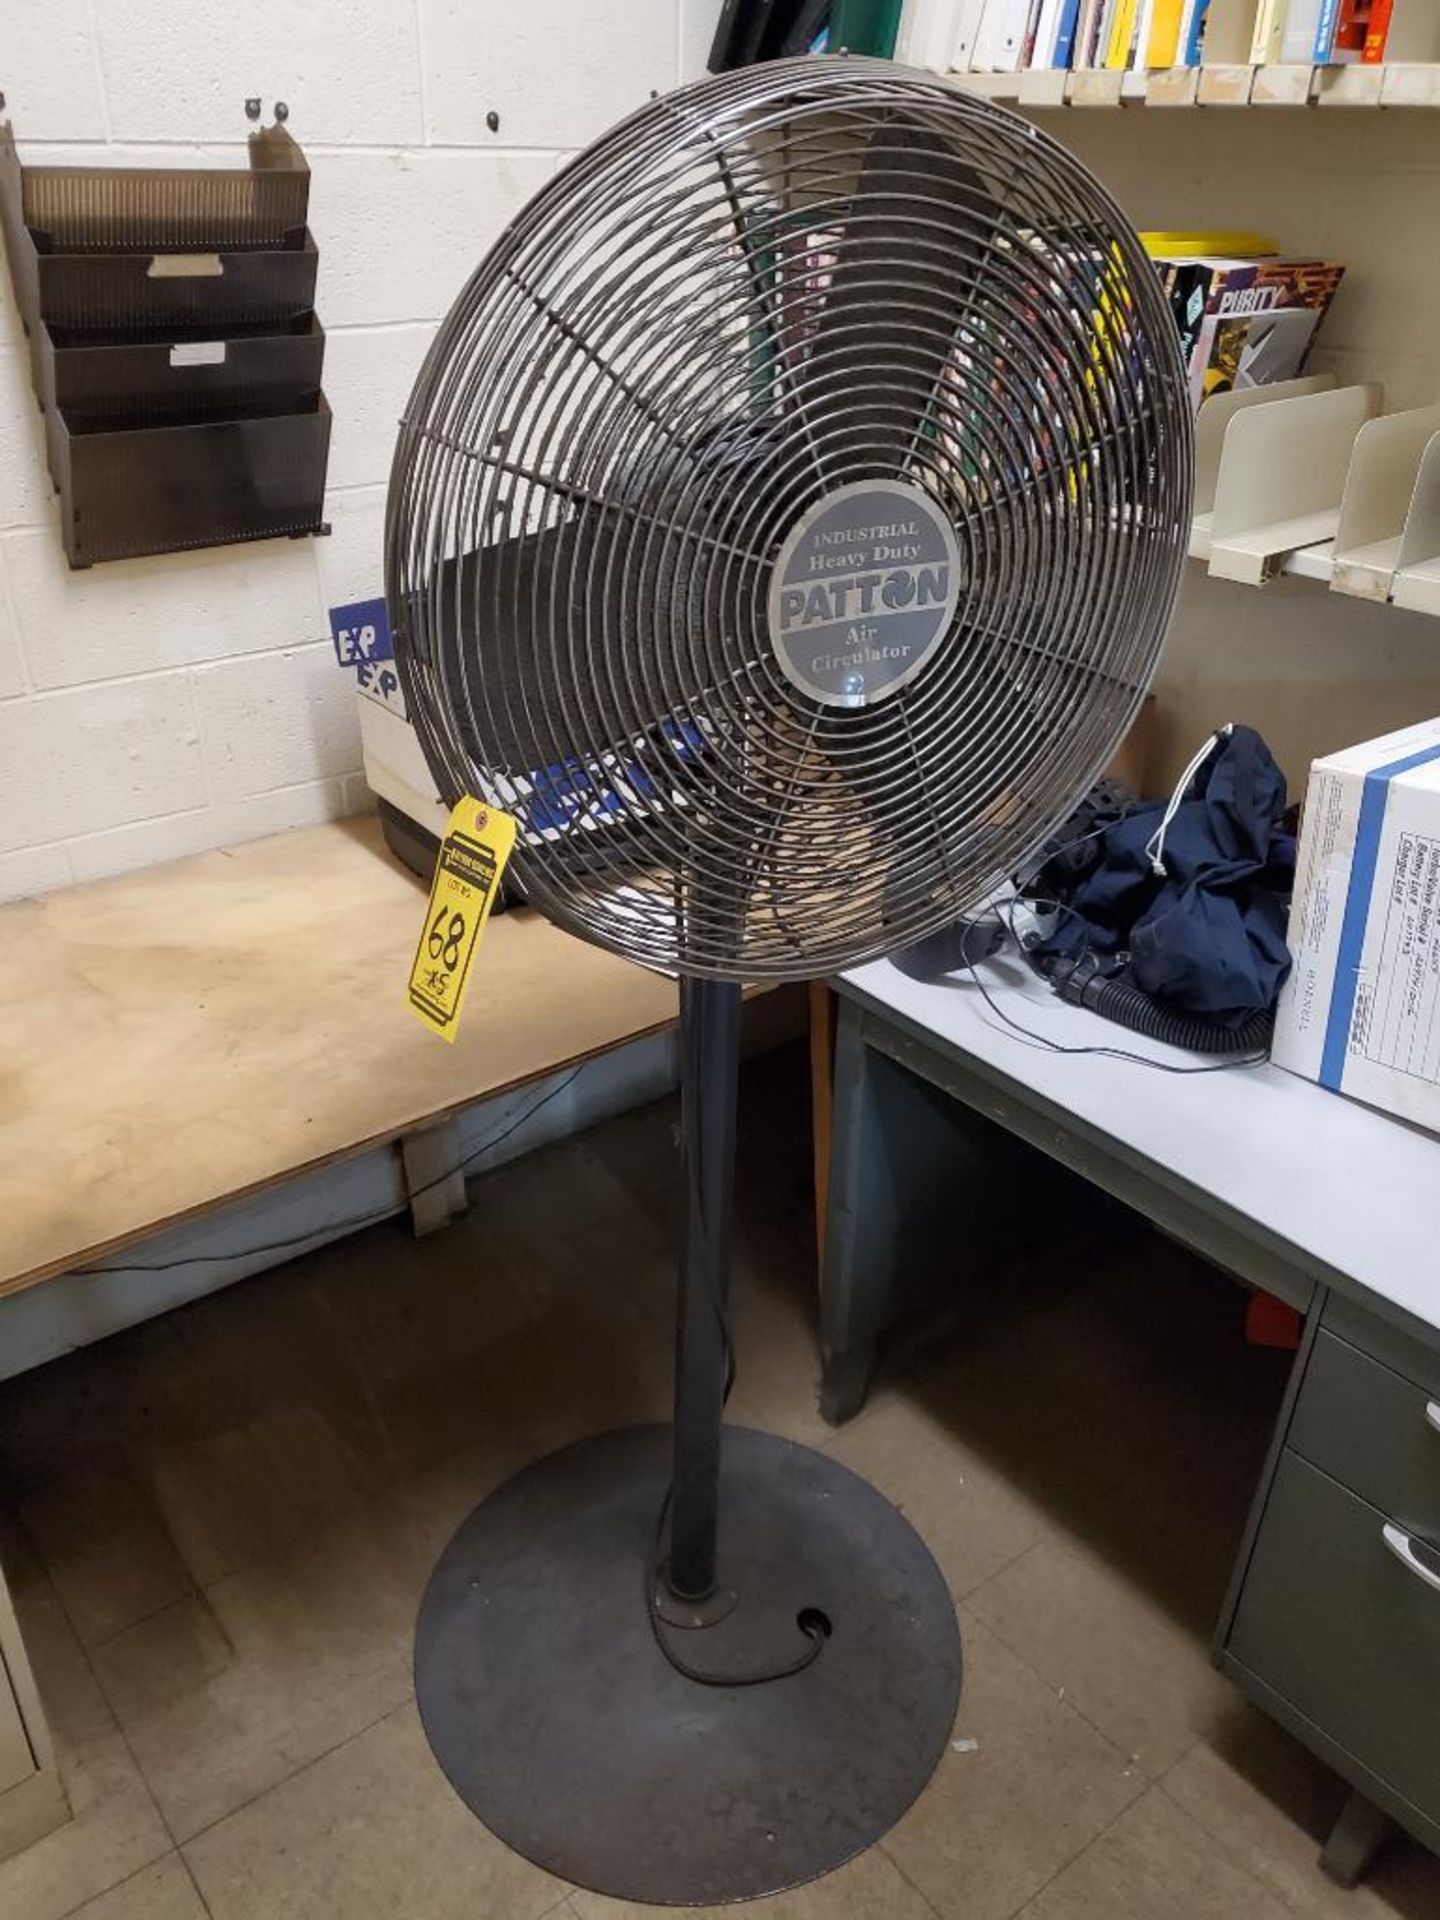 (5x) Industrial Pedestal Fans; Patton & Other Makes, Up To 32" - Image 2 of 4